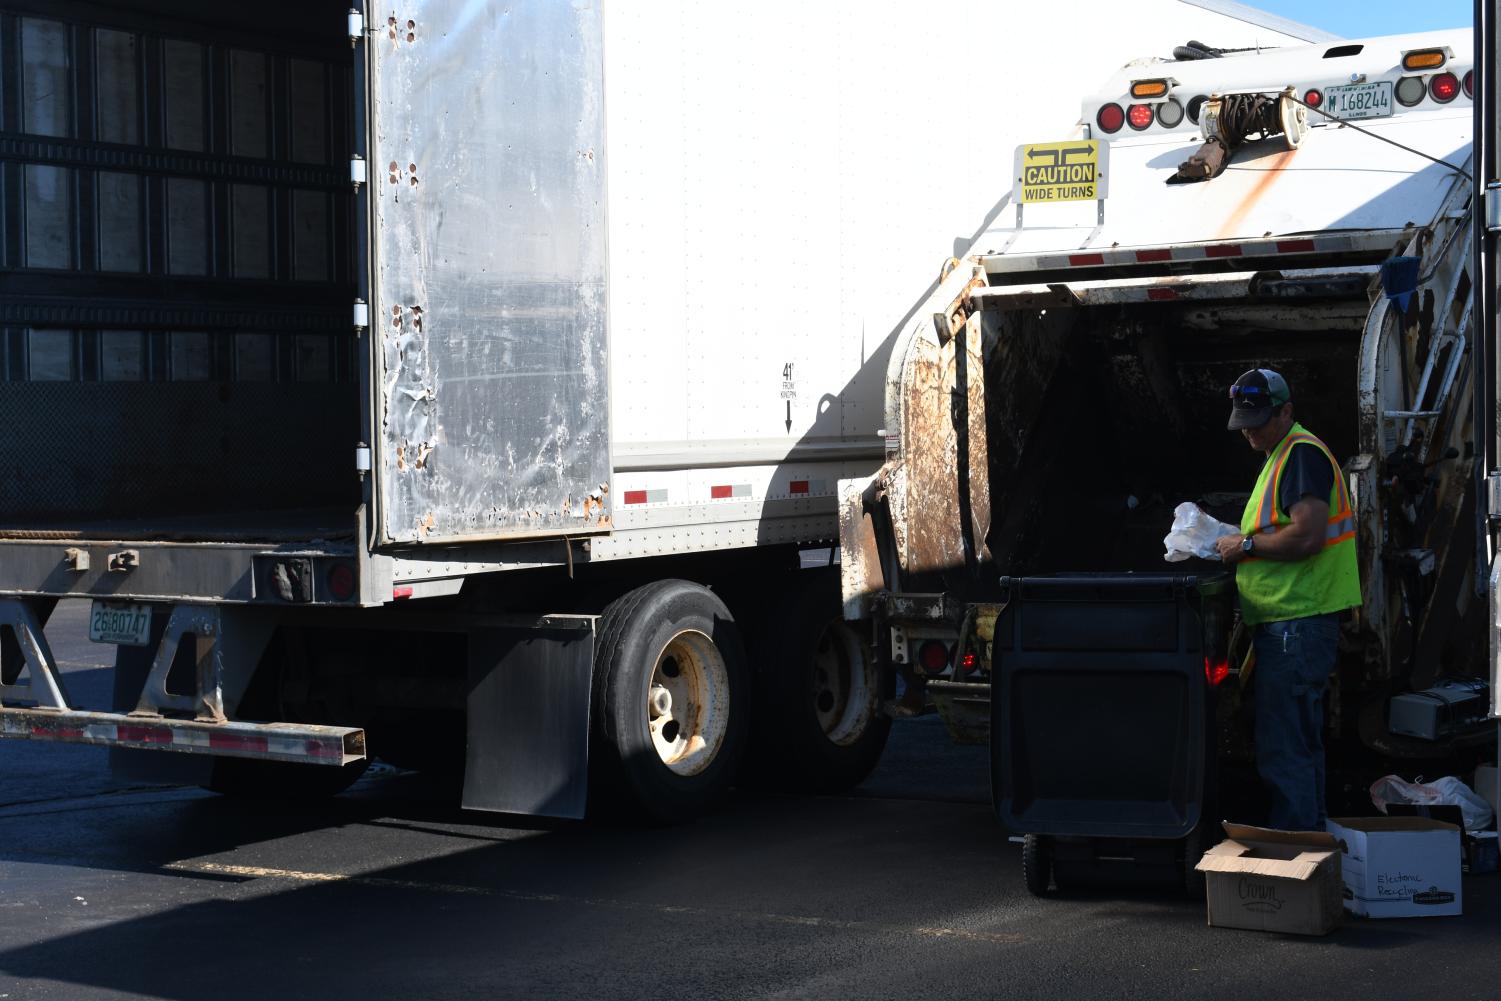 Evanston Recycles allows residents to drive up, drop off recyclables